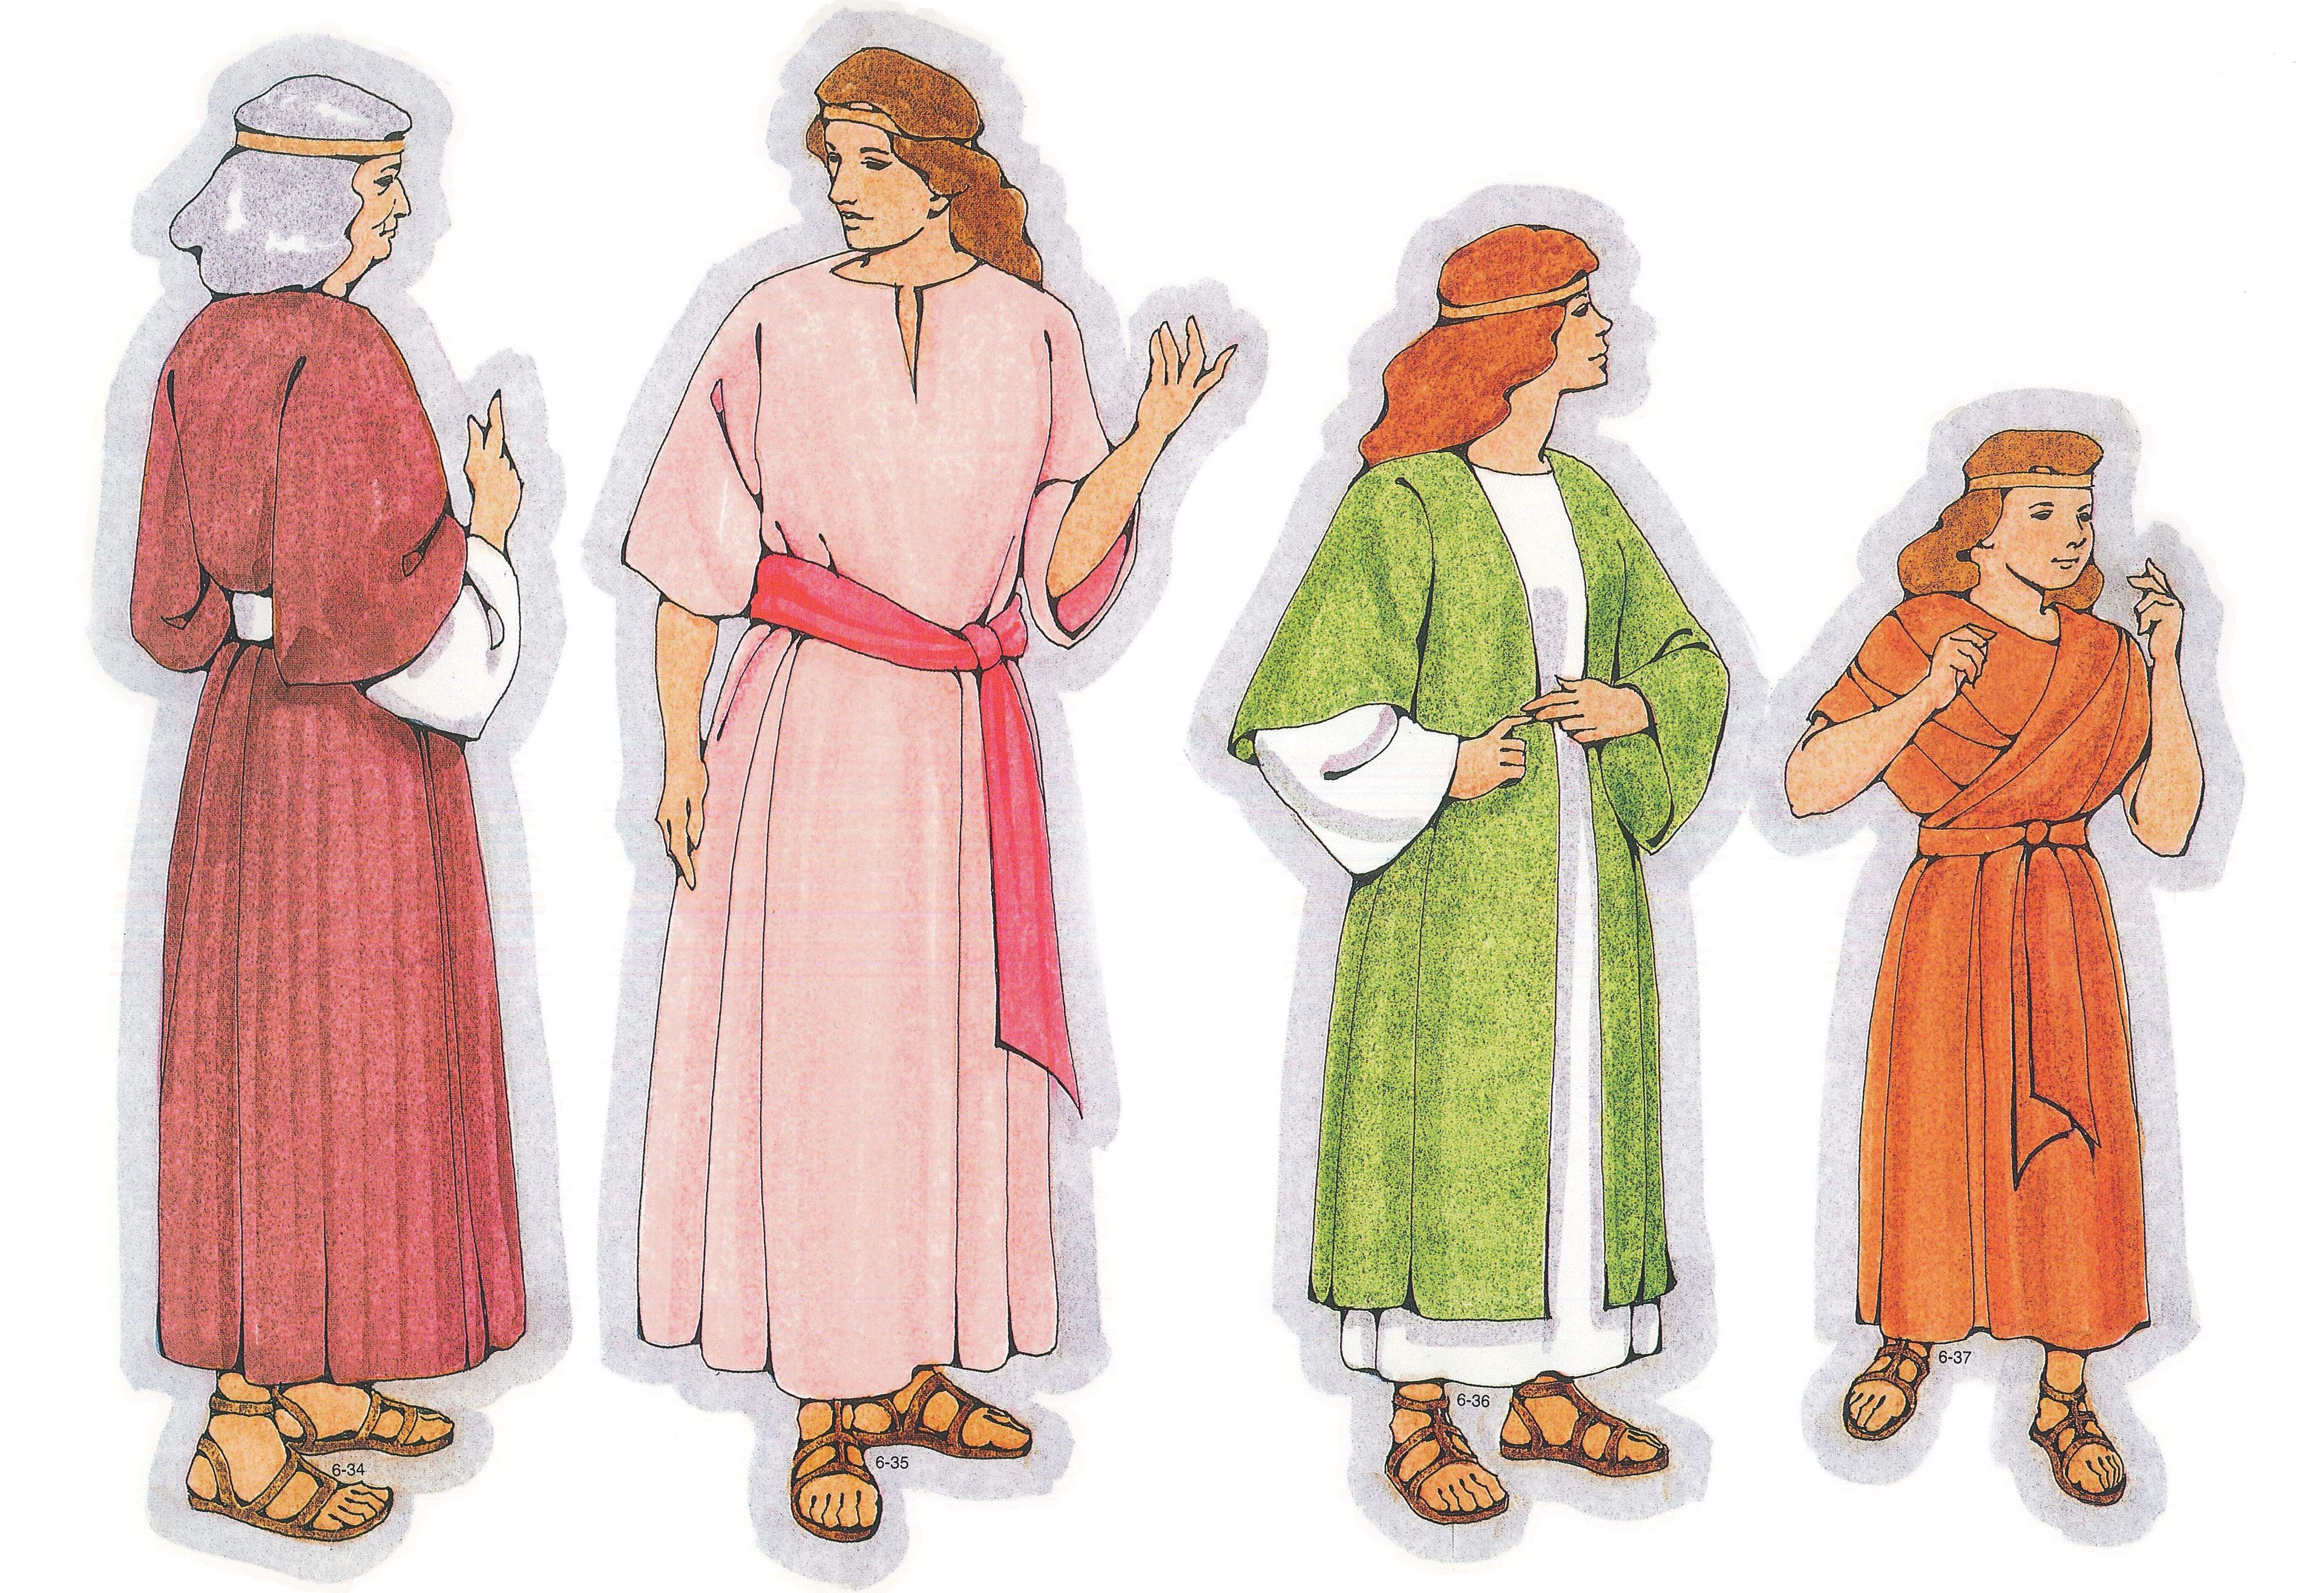 Primary Visual Aids: Cutouts 6-34, Nephite Woman with Gray Hair; 6-35, Middle-Aged Nephite Woman; 6-36, Nephite Young Woman in a Green Robe; 6-37, Nephite Girl.